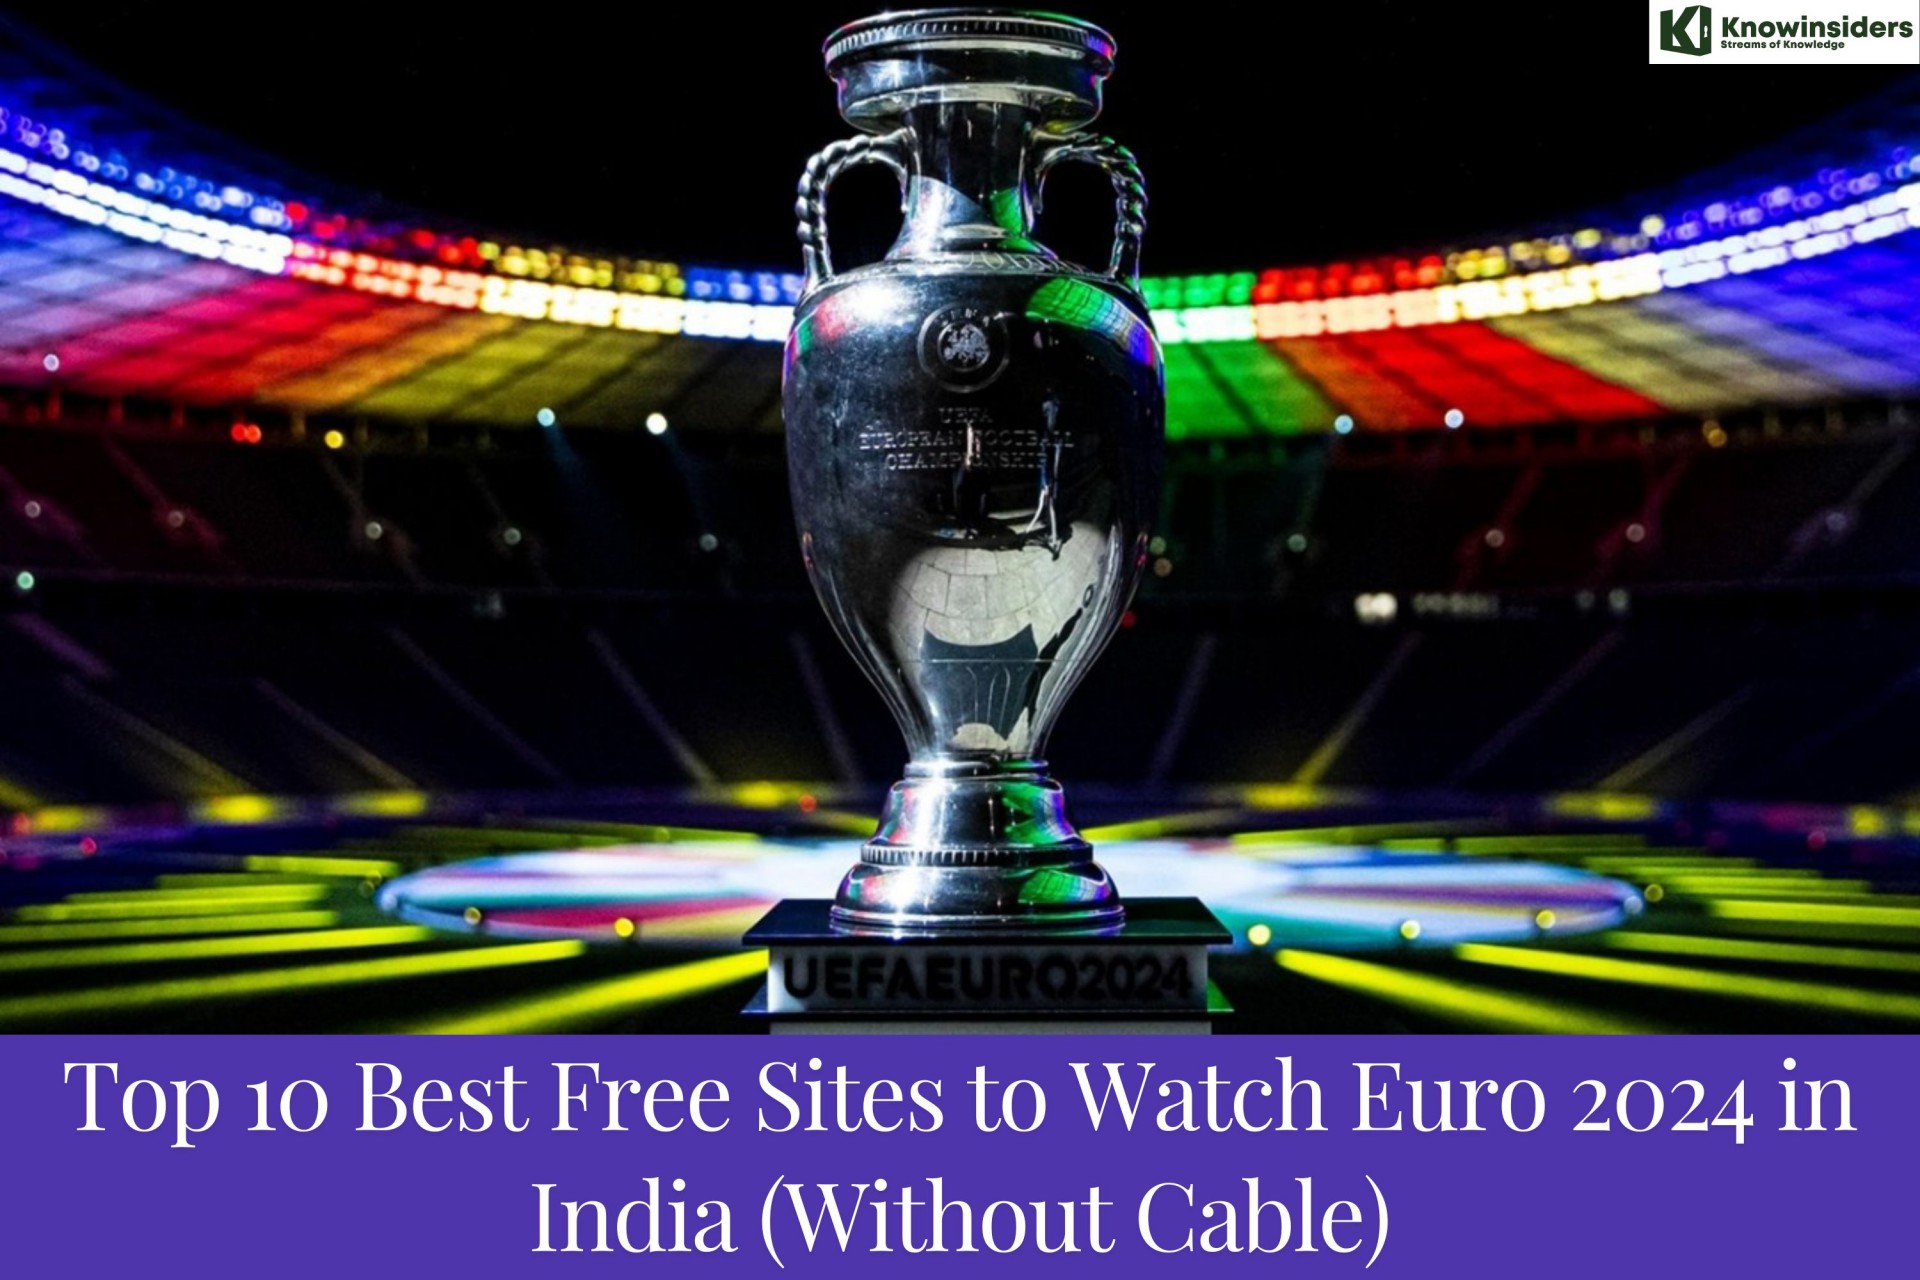 Top 10 FREE Sites to Watch Euro 2024 from India (Without Cable)